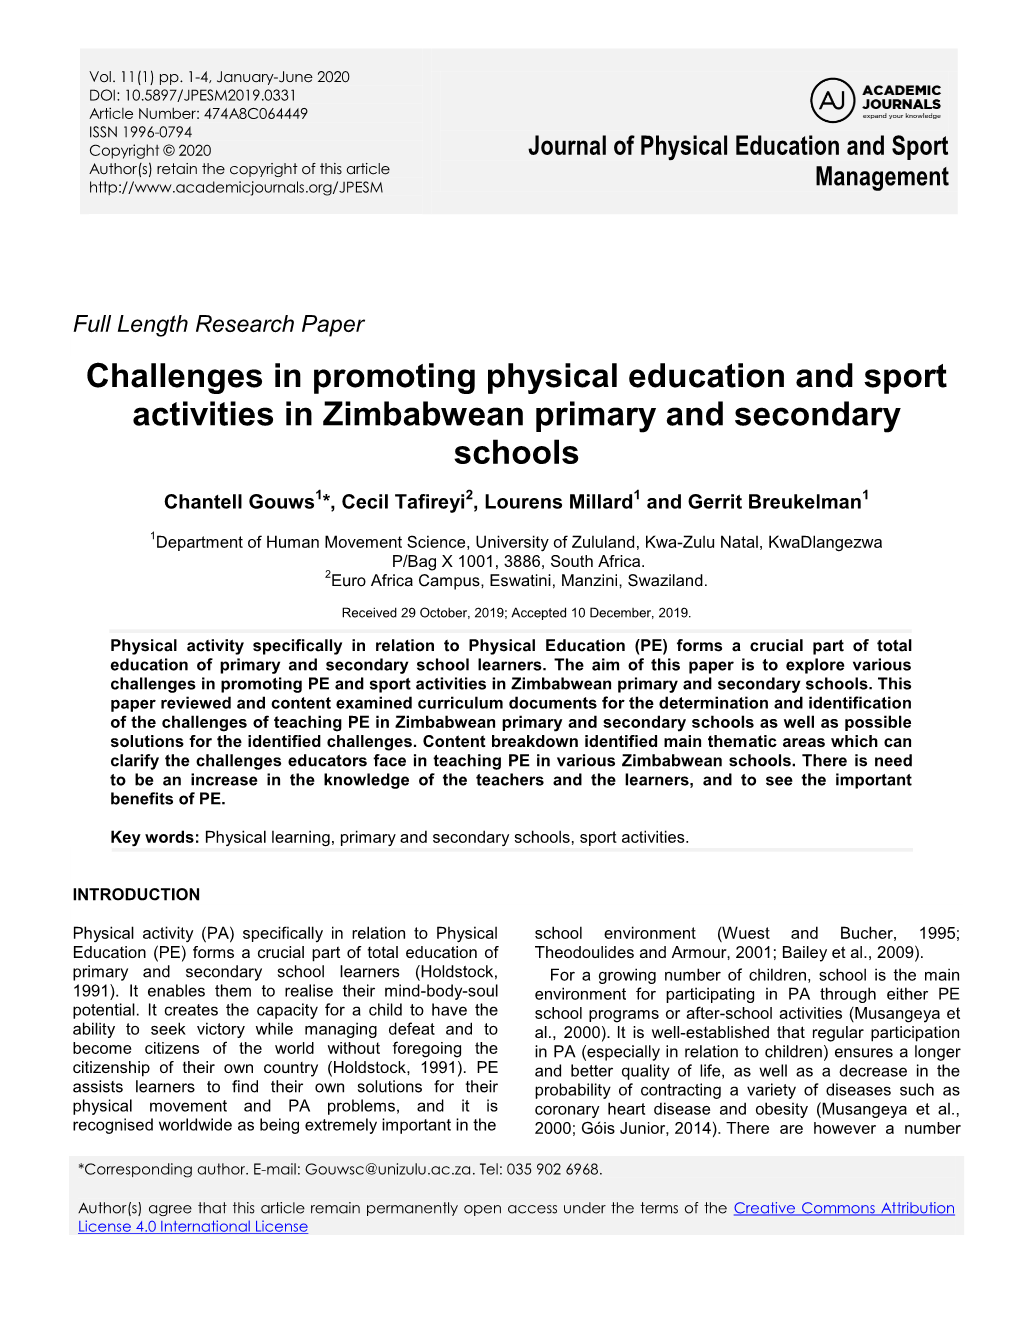 Challenges in Promoting Physical Education and Sport Activities in Zimbabwean Primary and Secondary Schools